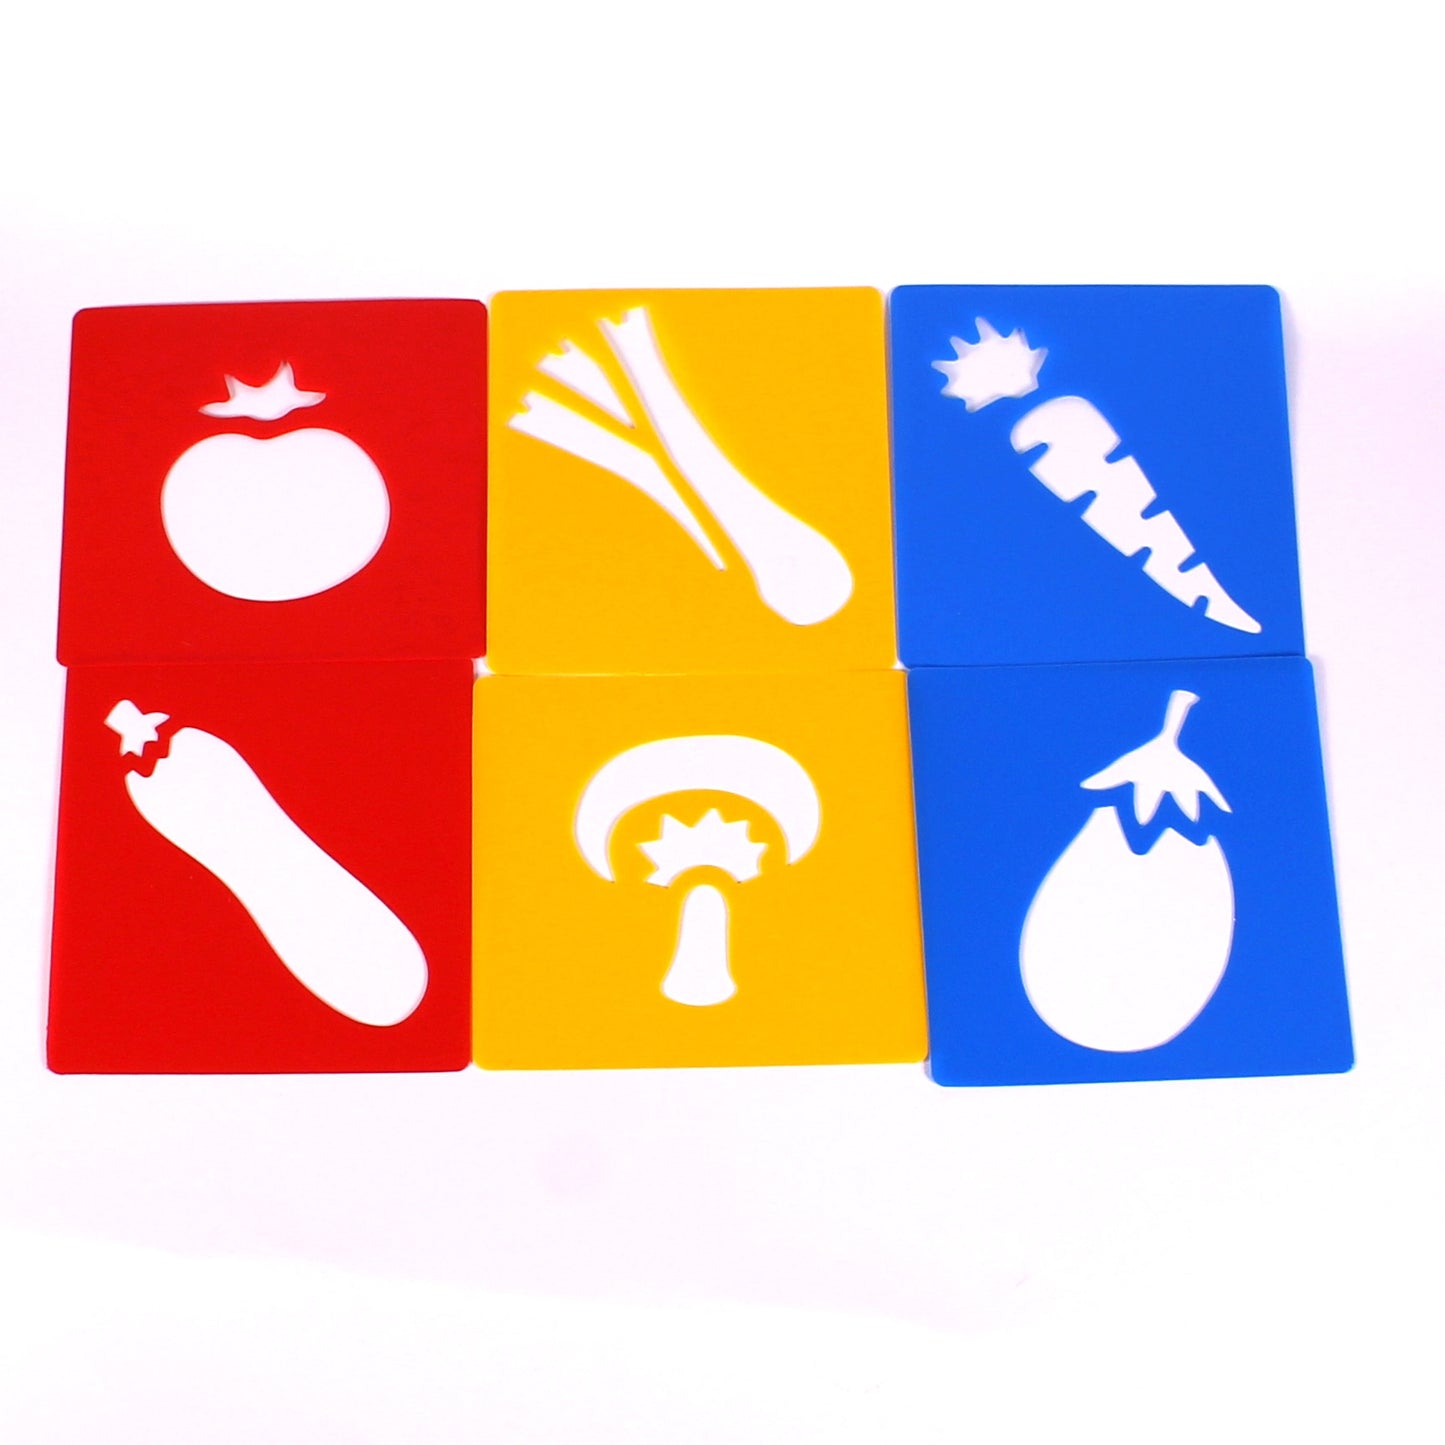 Plastic Washable Vegetable Stencils size 14 x 15.5cm Pack of 6 by BCreative ®